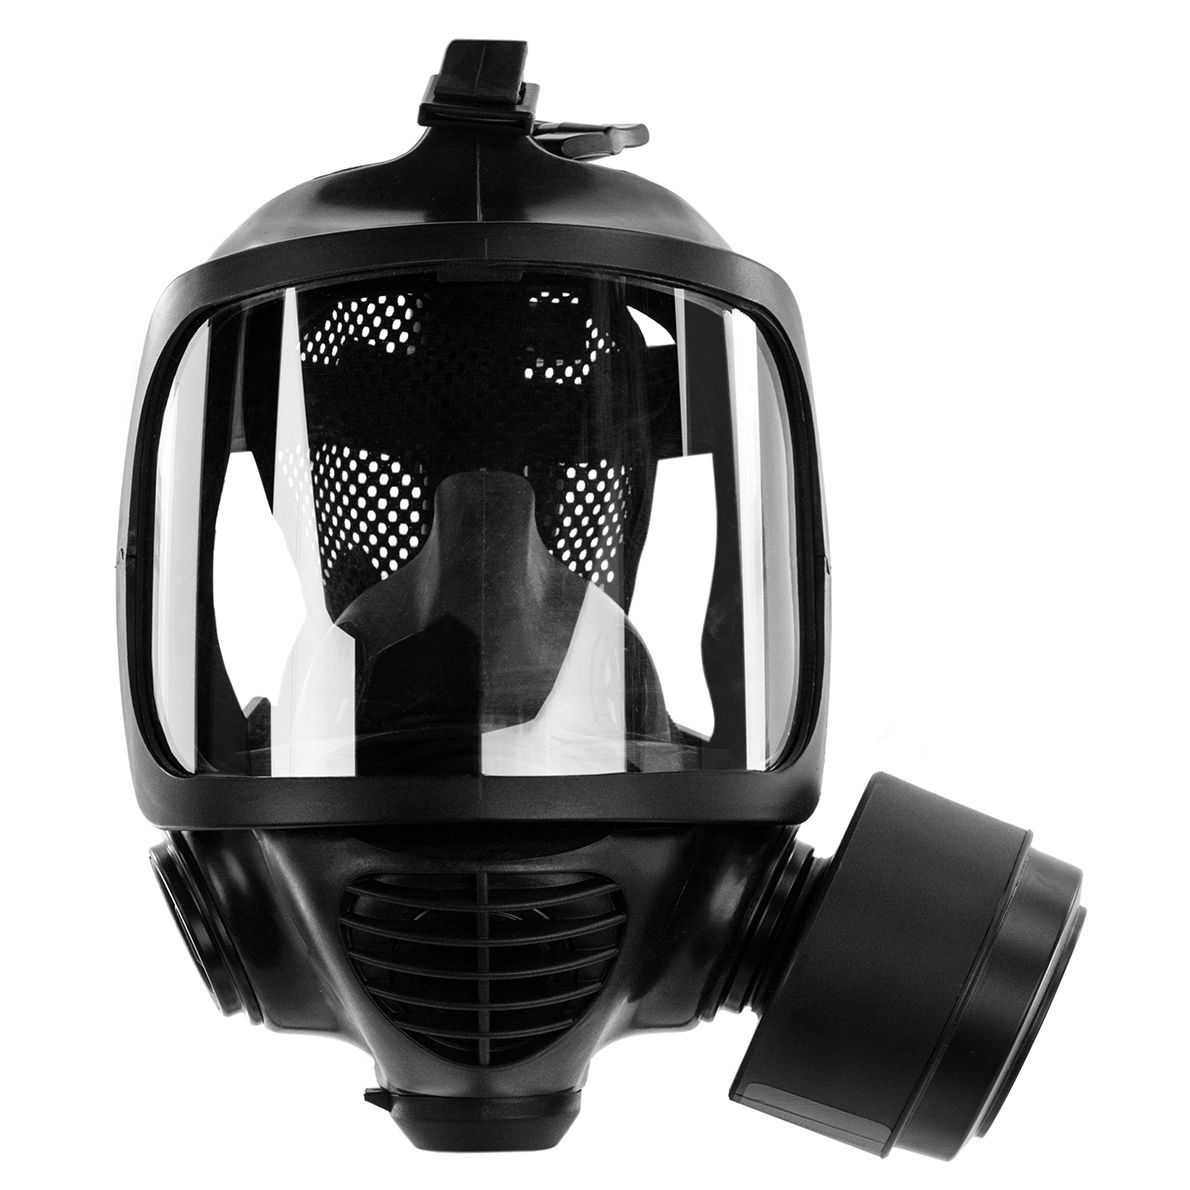 ACE Calypso CM-6 Full Face Mask - Work & Emergency Respirator - Rd40 Connection for Two Filters